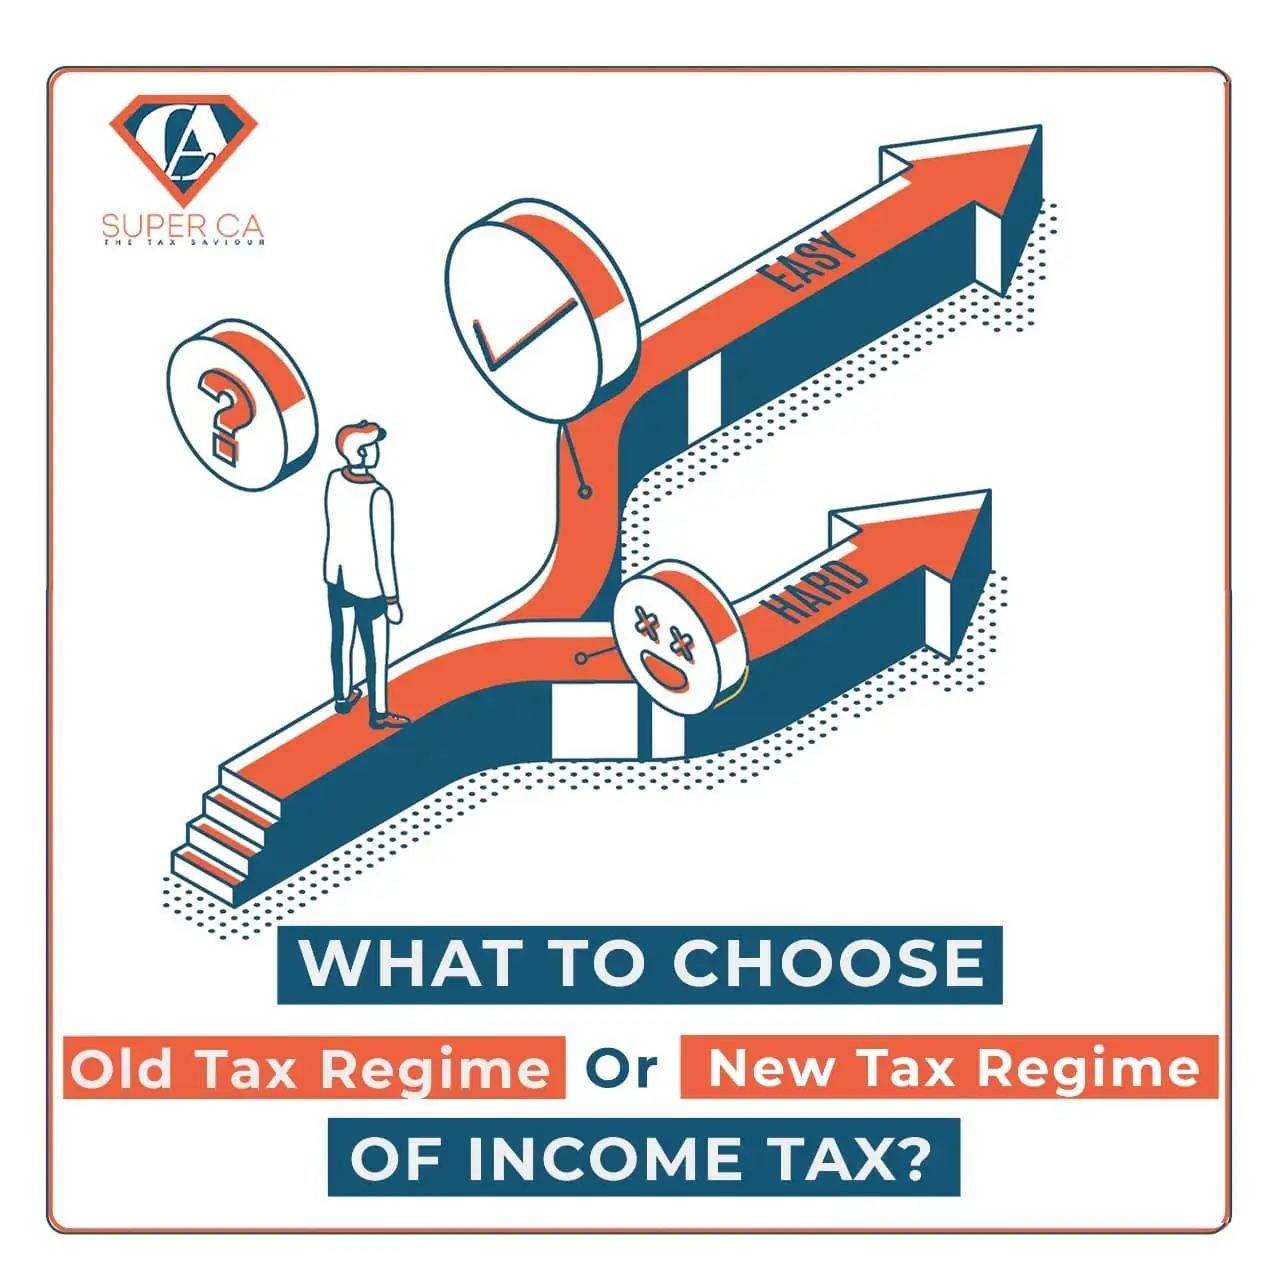 What should a taxpayer choose – Old or New regime of income tax?